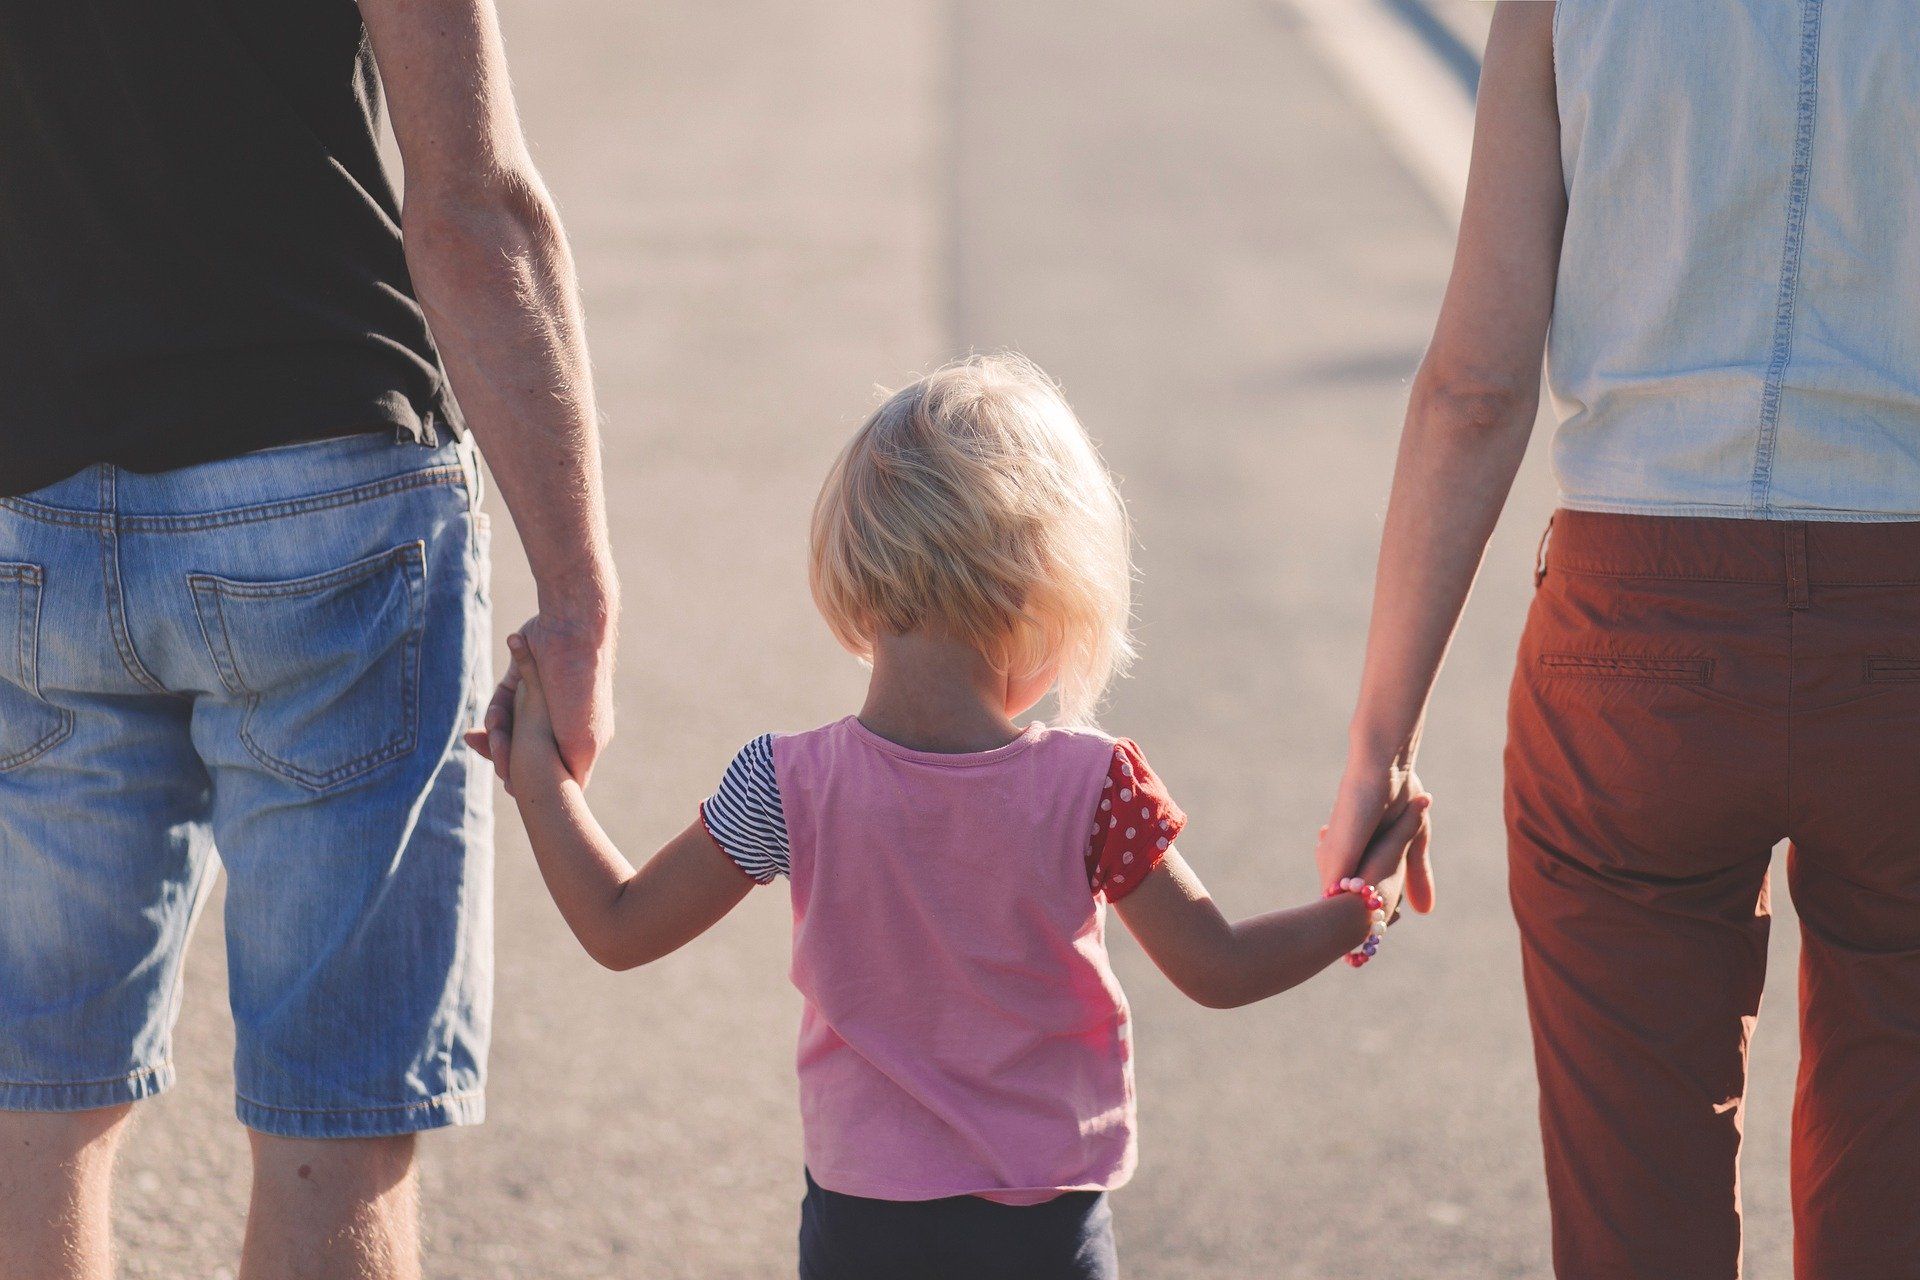 a separated mother and father hold hands with their young daughter who they are co-parenting after divorcing 